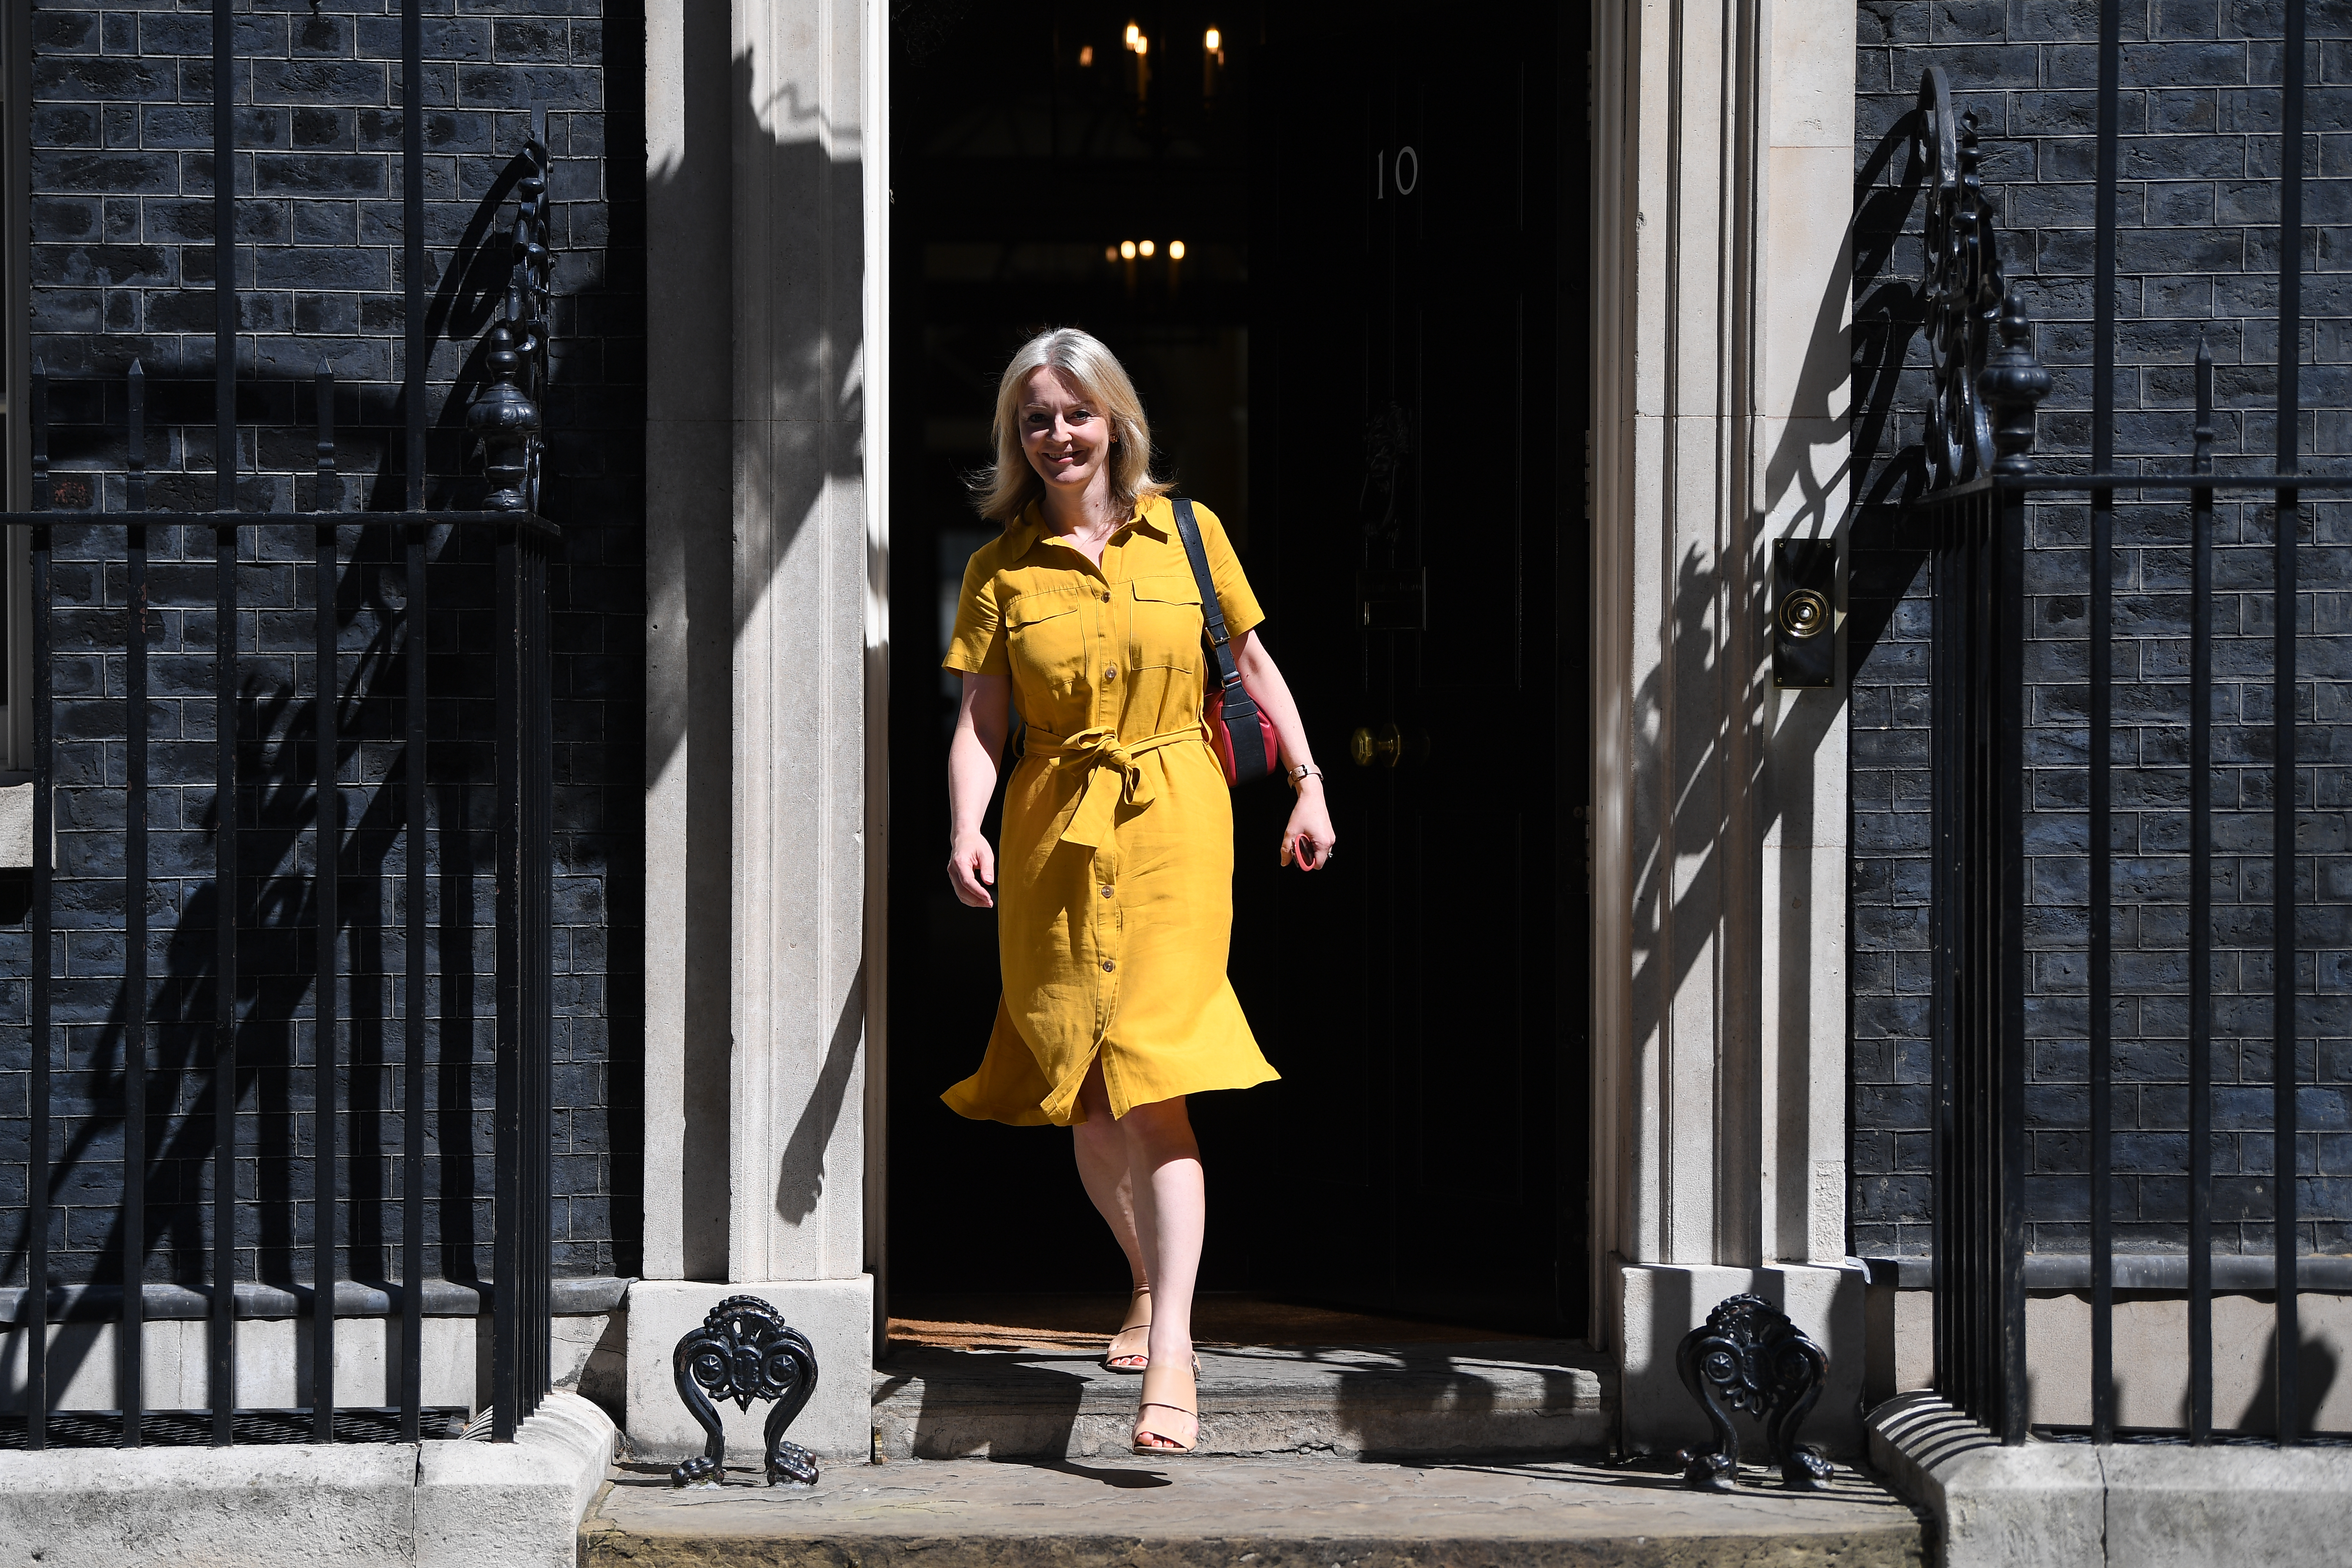 Liz Truss leaves after a cabinet meeting at 10 Downing Street, London, in 2019 